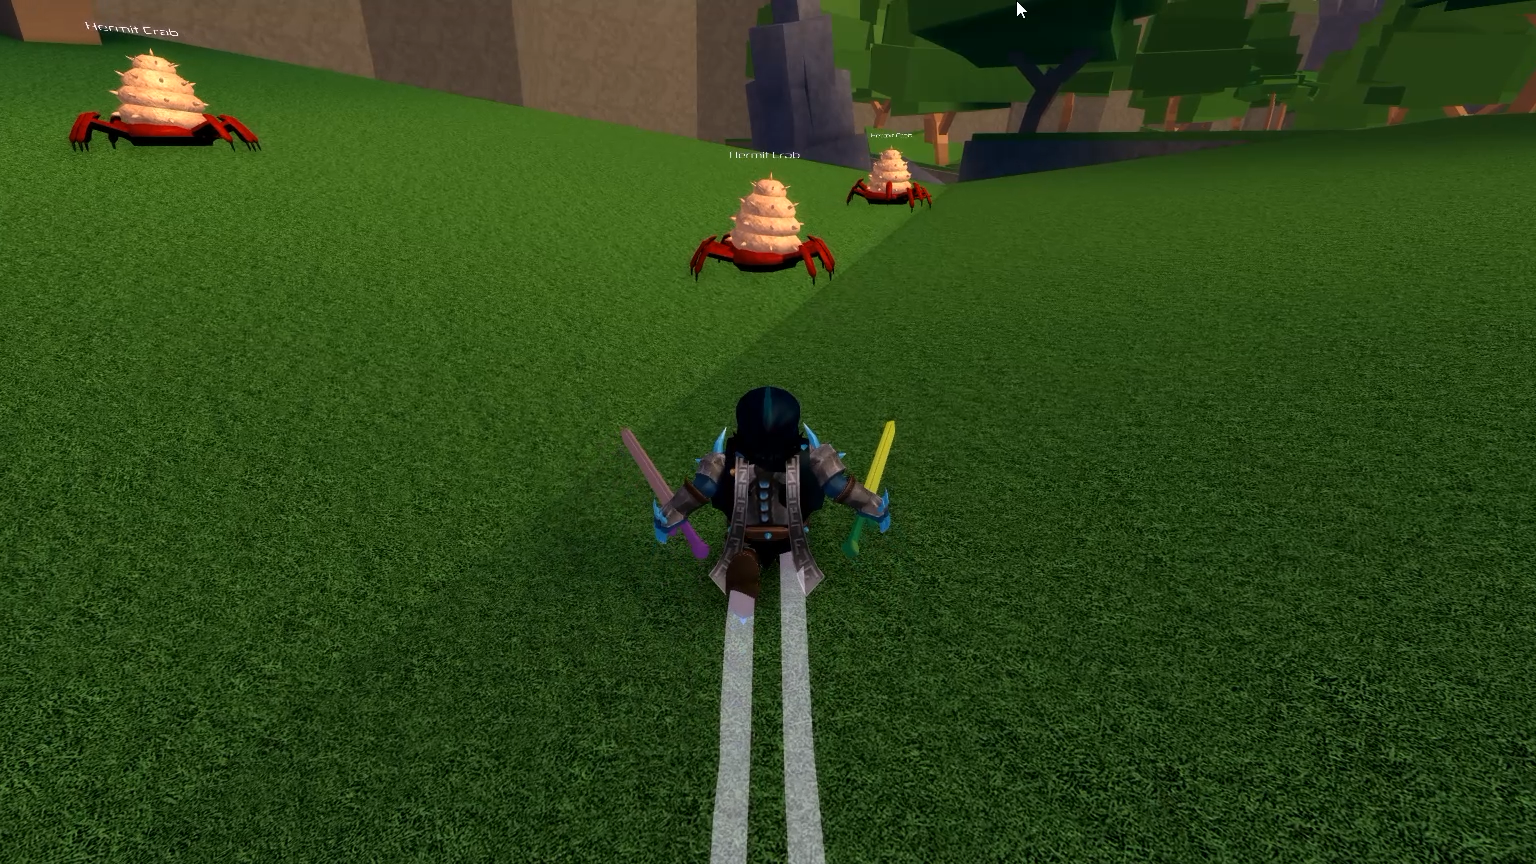 Roblox - Play Heroes of Robloxia on Xbox One and other platforms